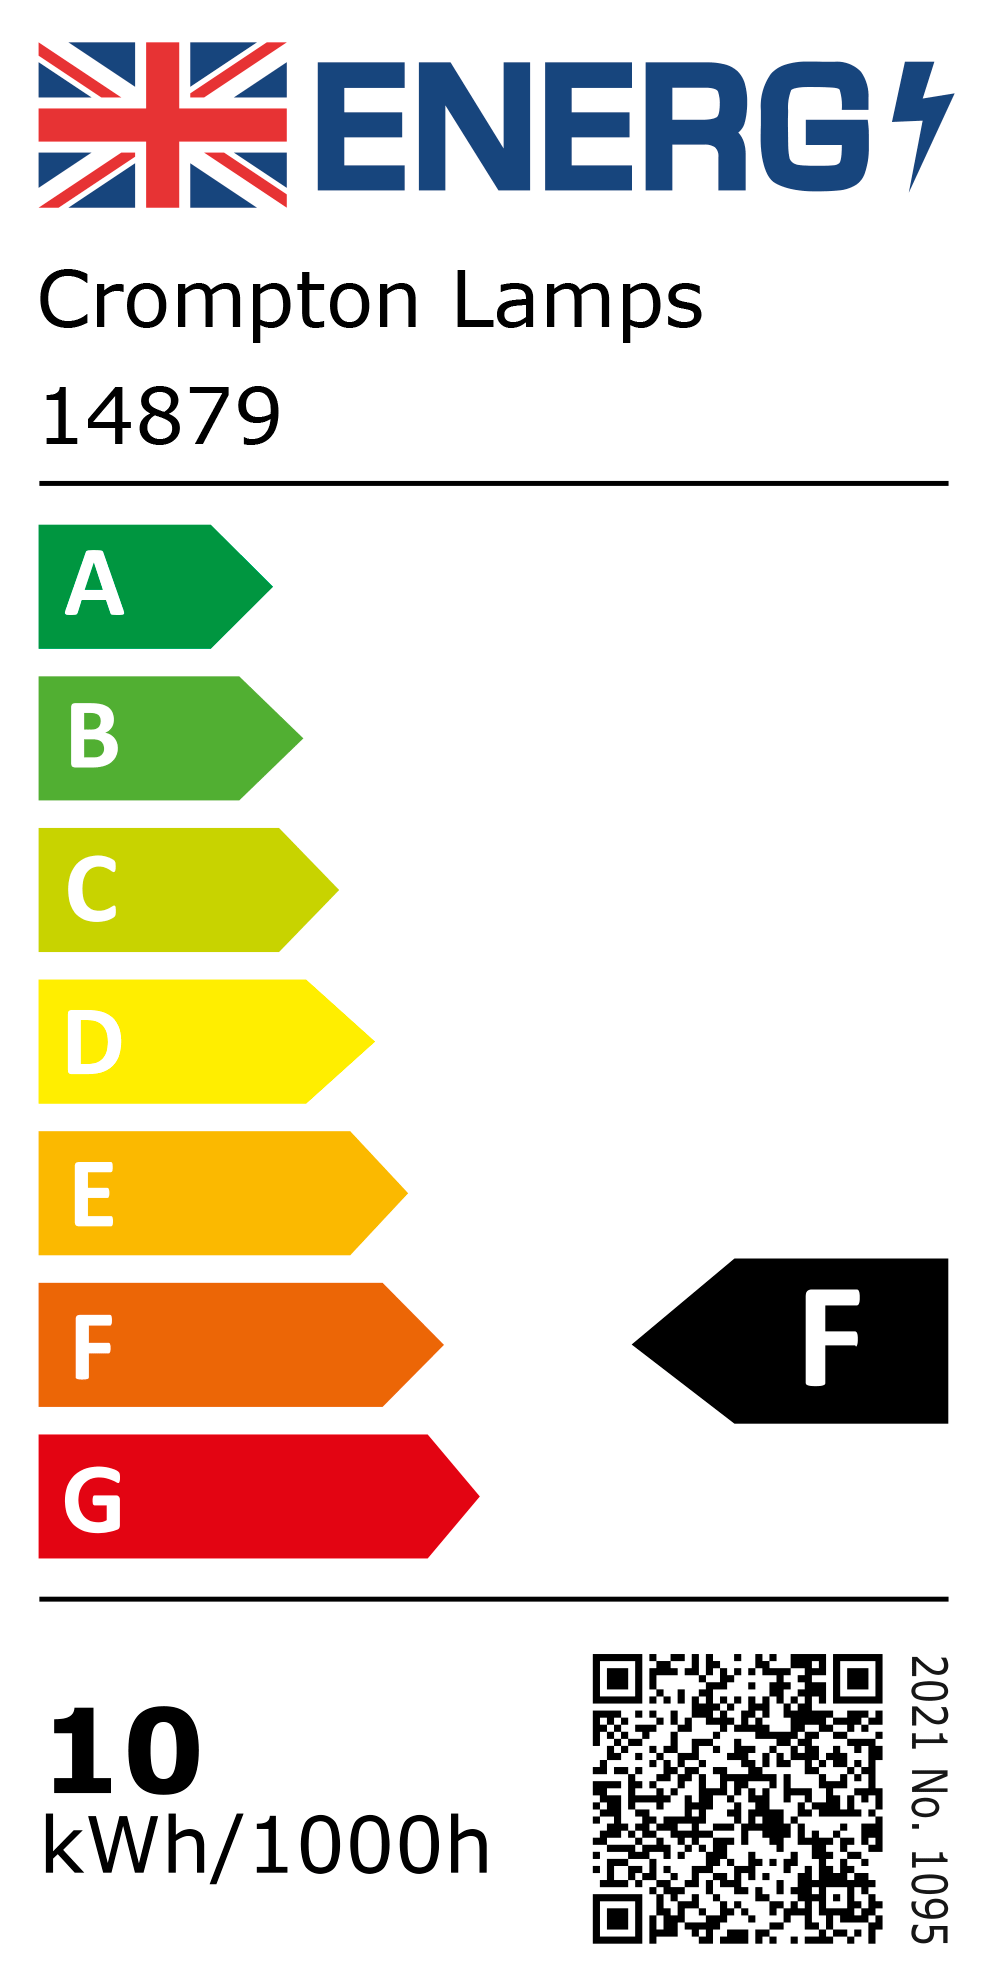 New 2021 Energy Rating Label: Stock Code 14879